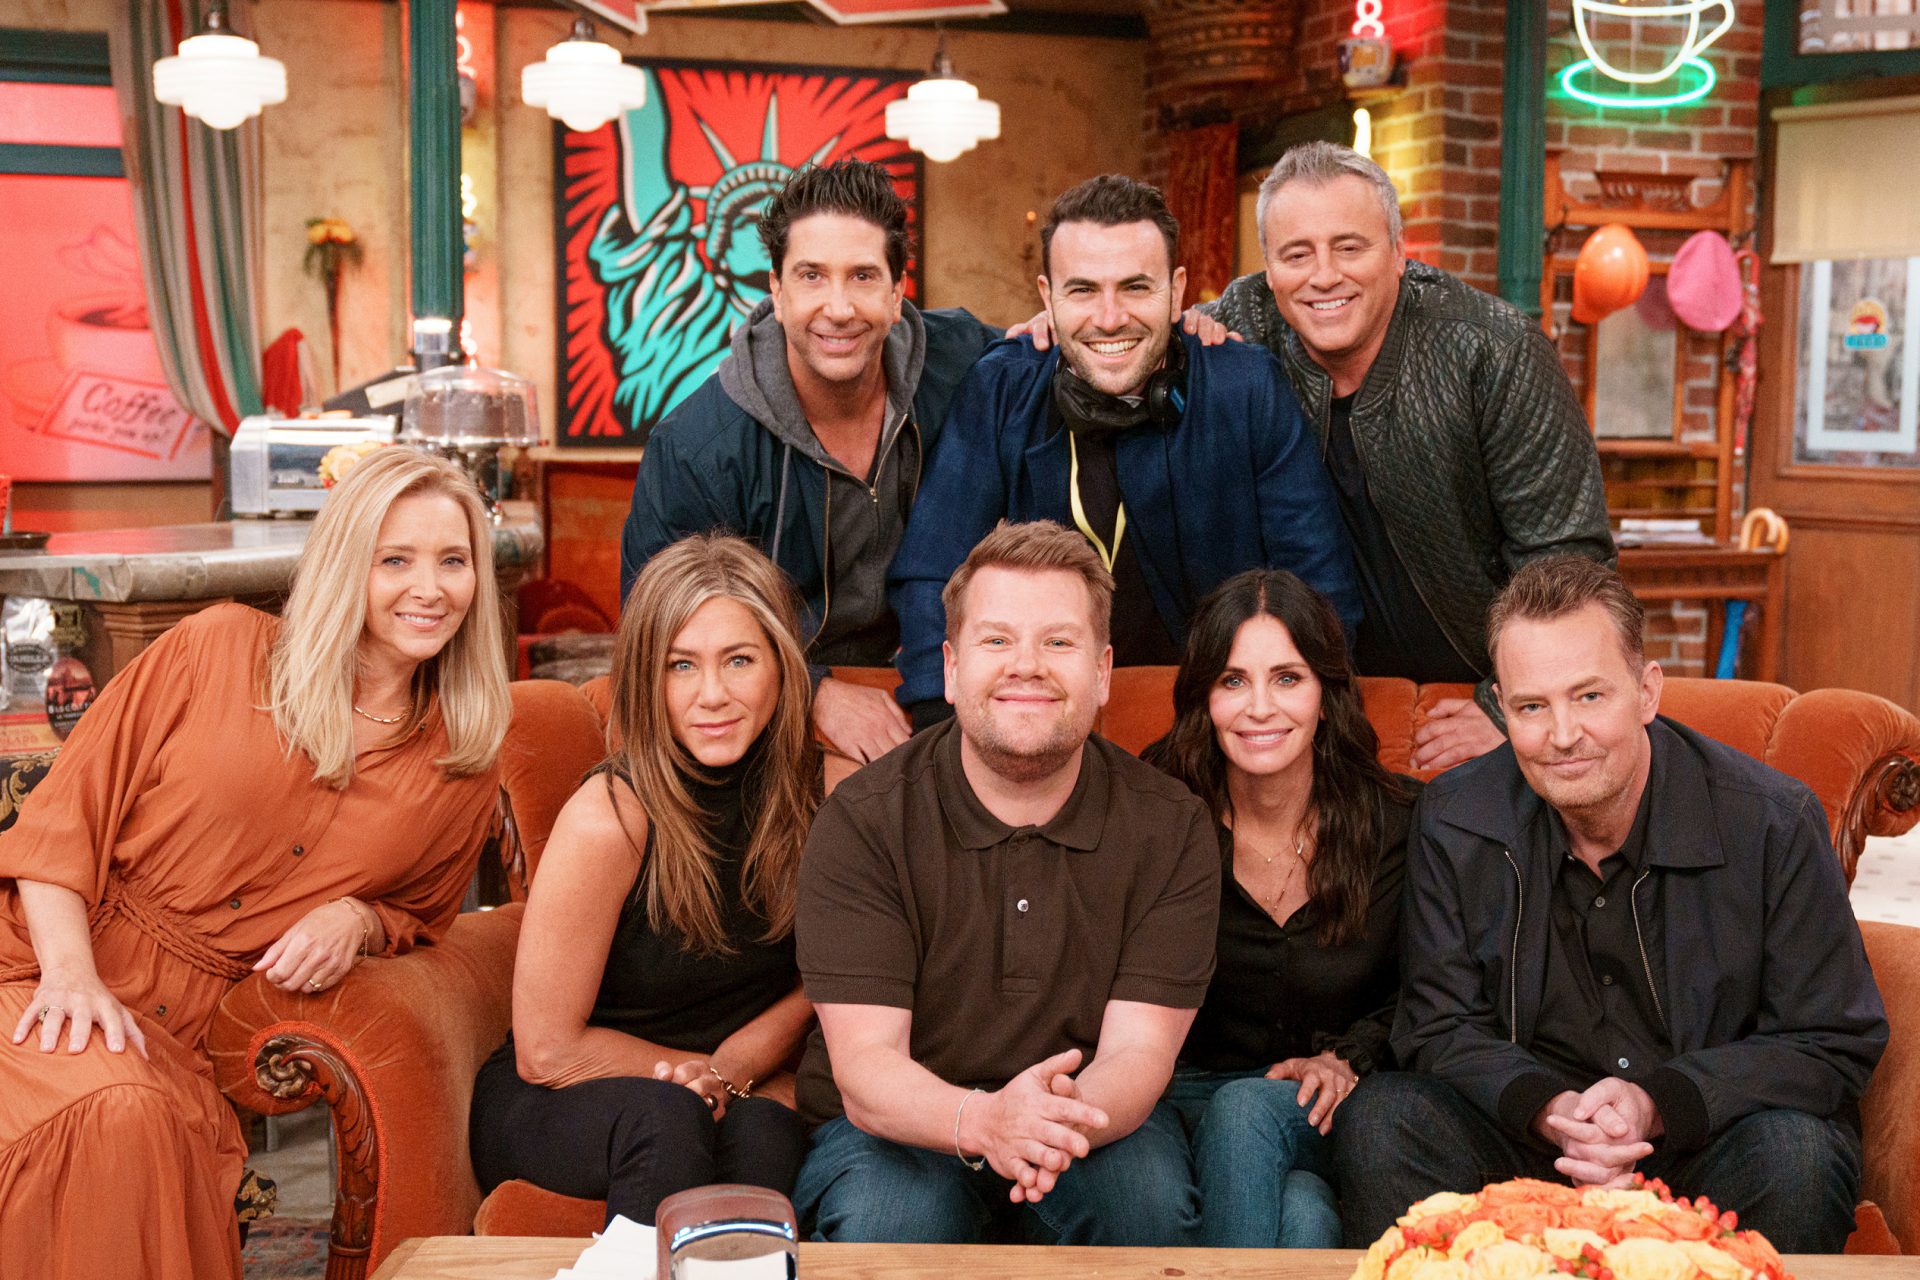 In 2021, the cast of ‘Friends’ reunited for a reunion show